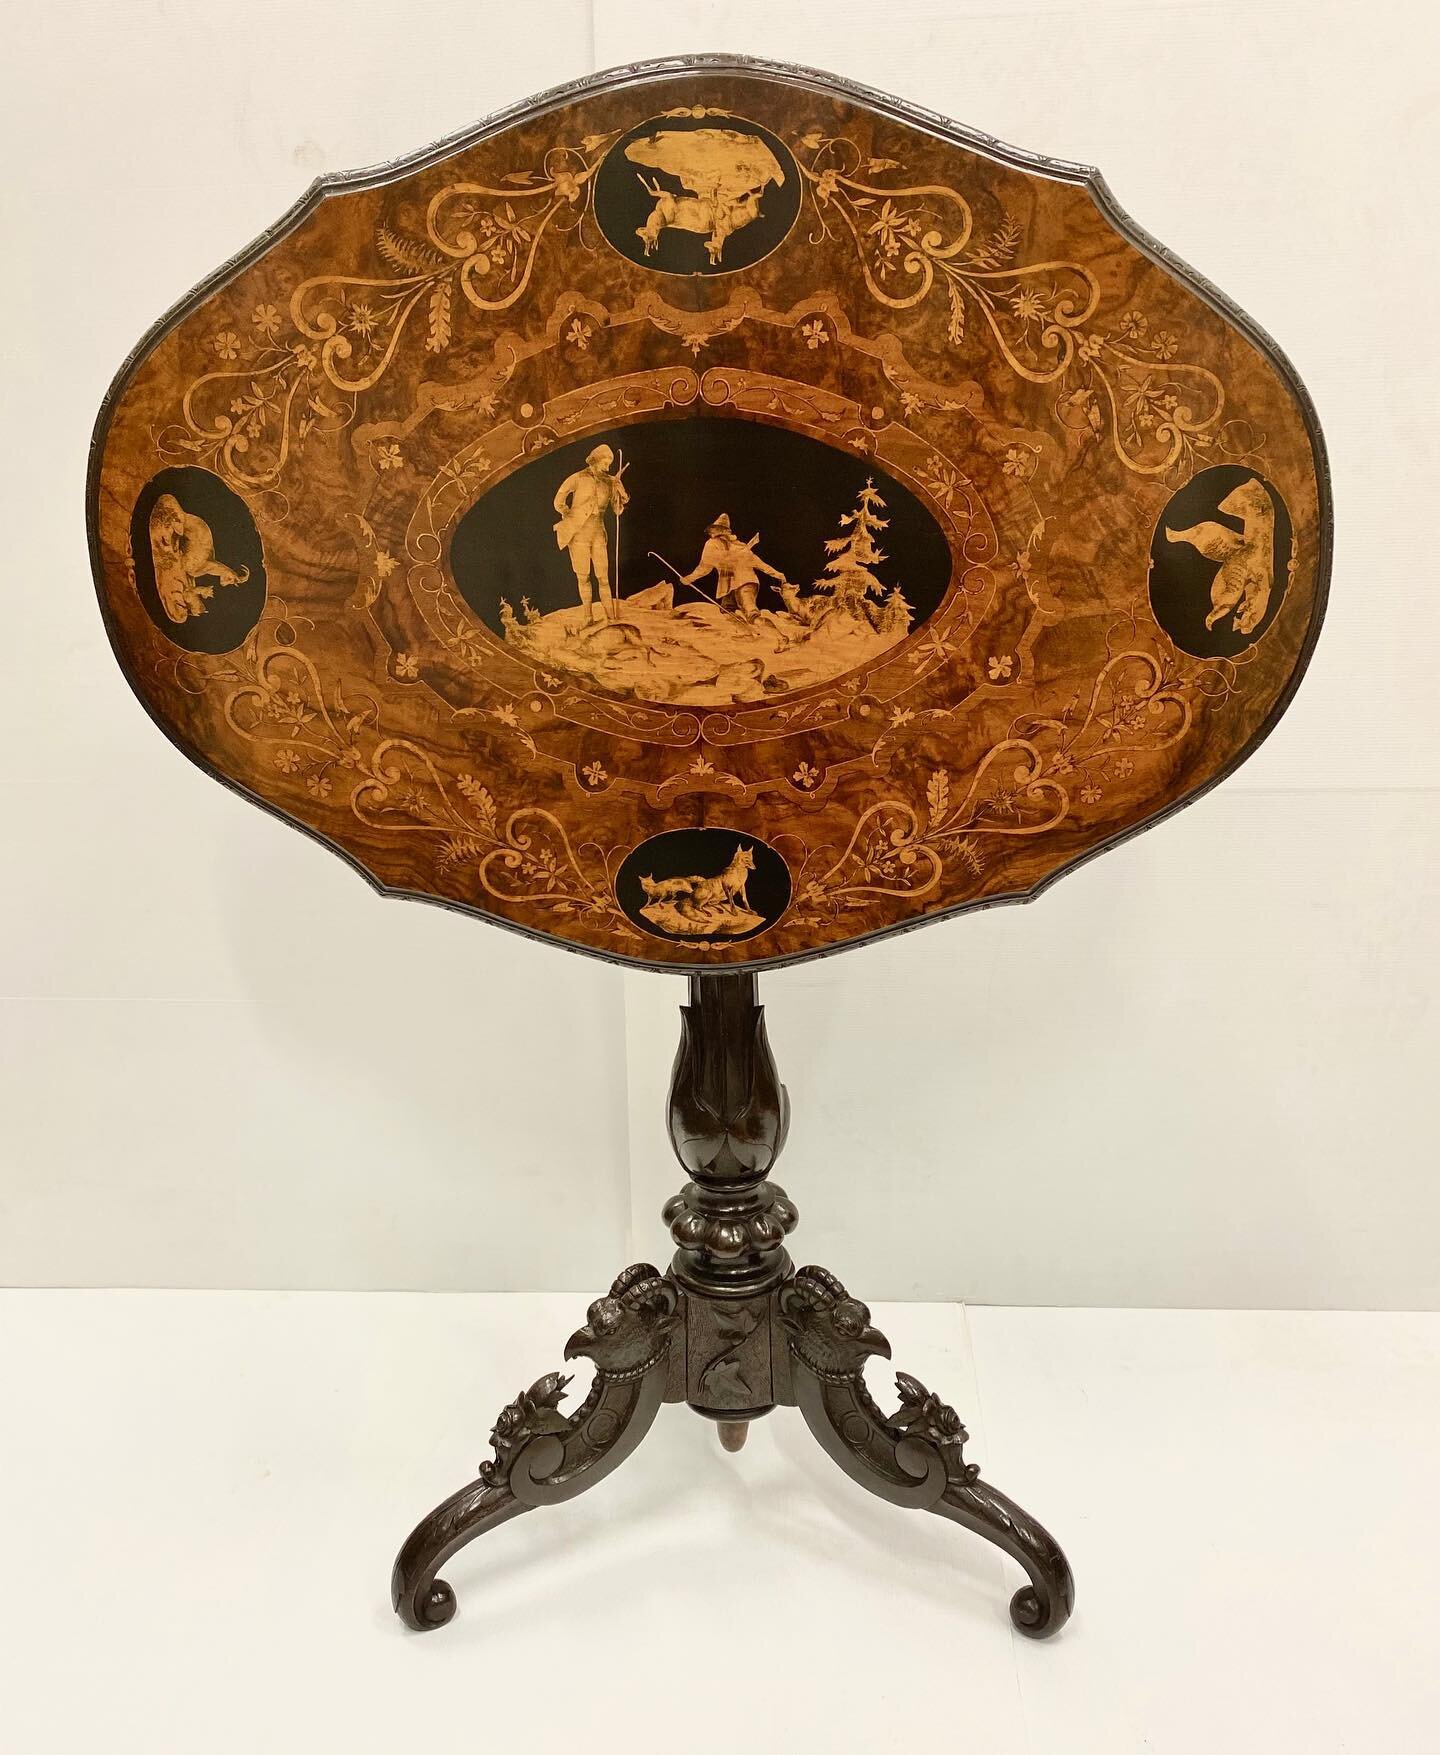 A beautiful 19th century walnut Black Forest inlay table, top tilts back to display images of animals and hunting scene, magnificently carved tripod base also depicting animals.